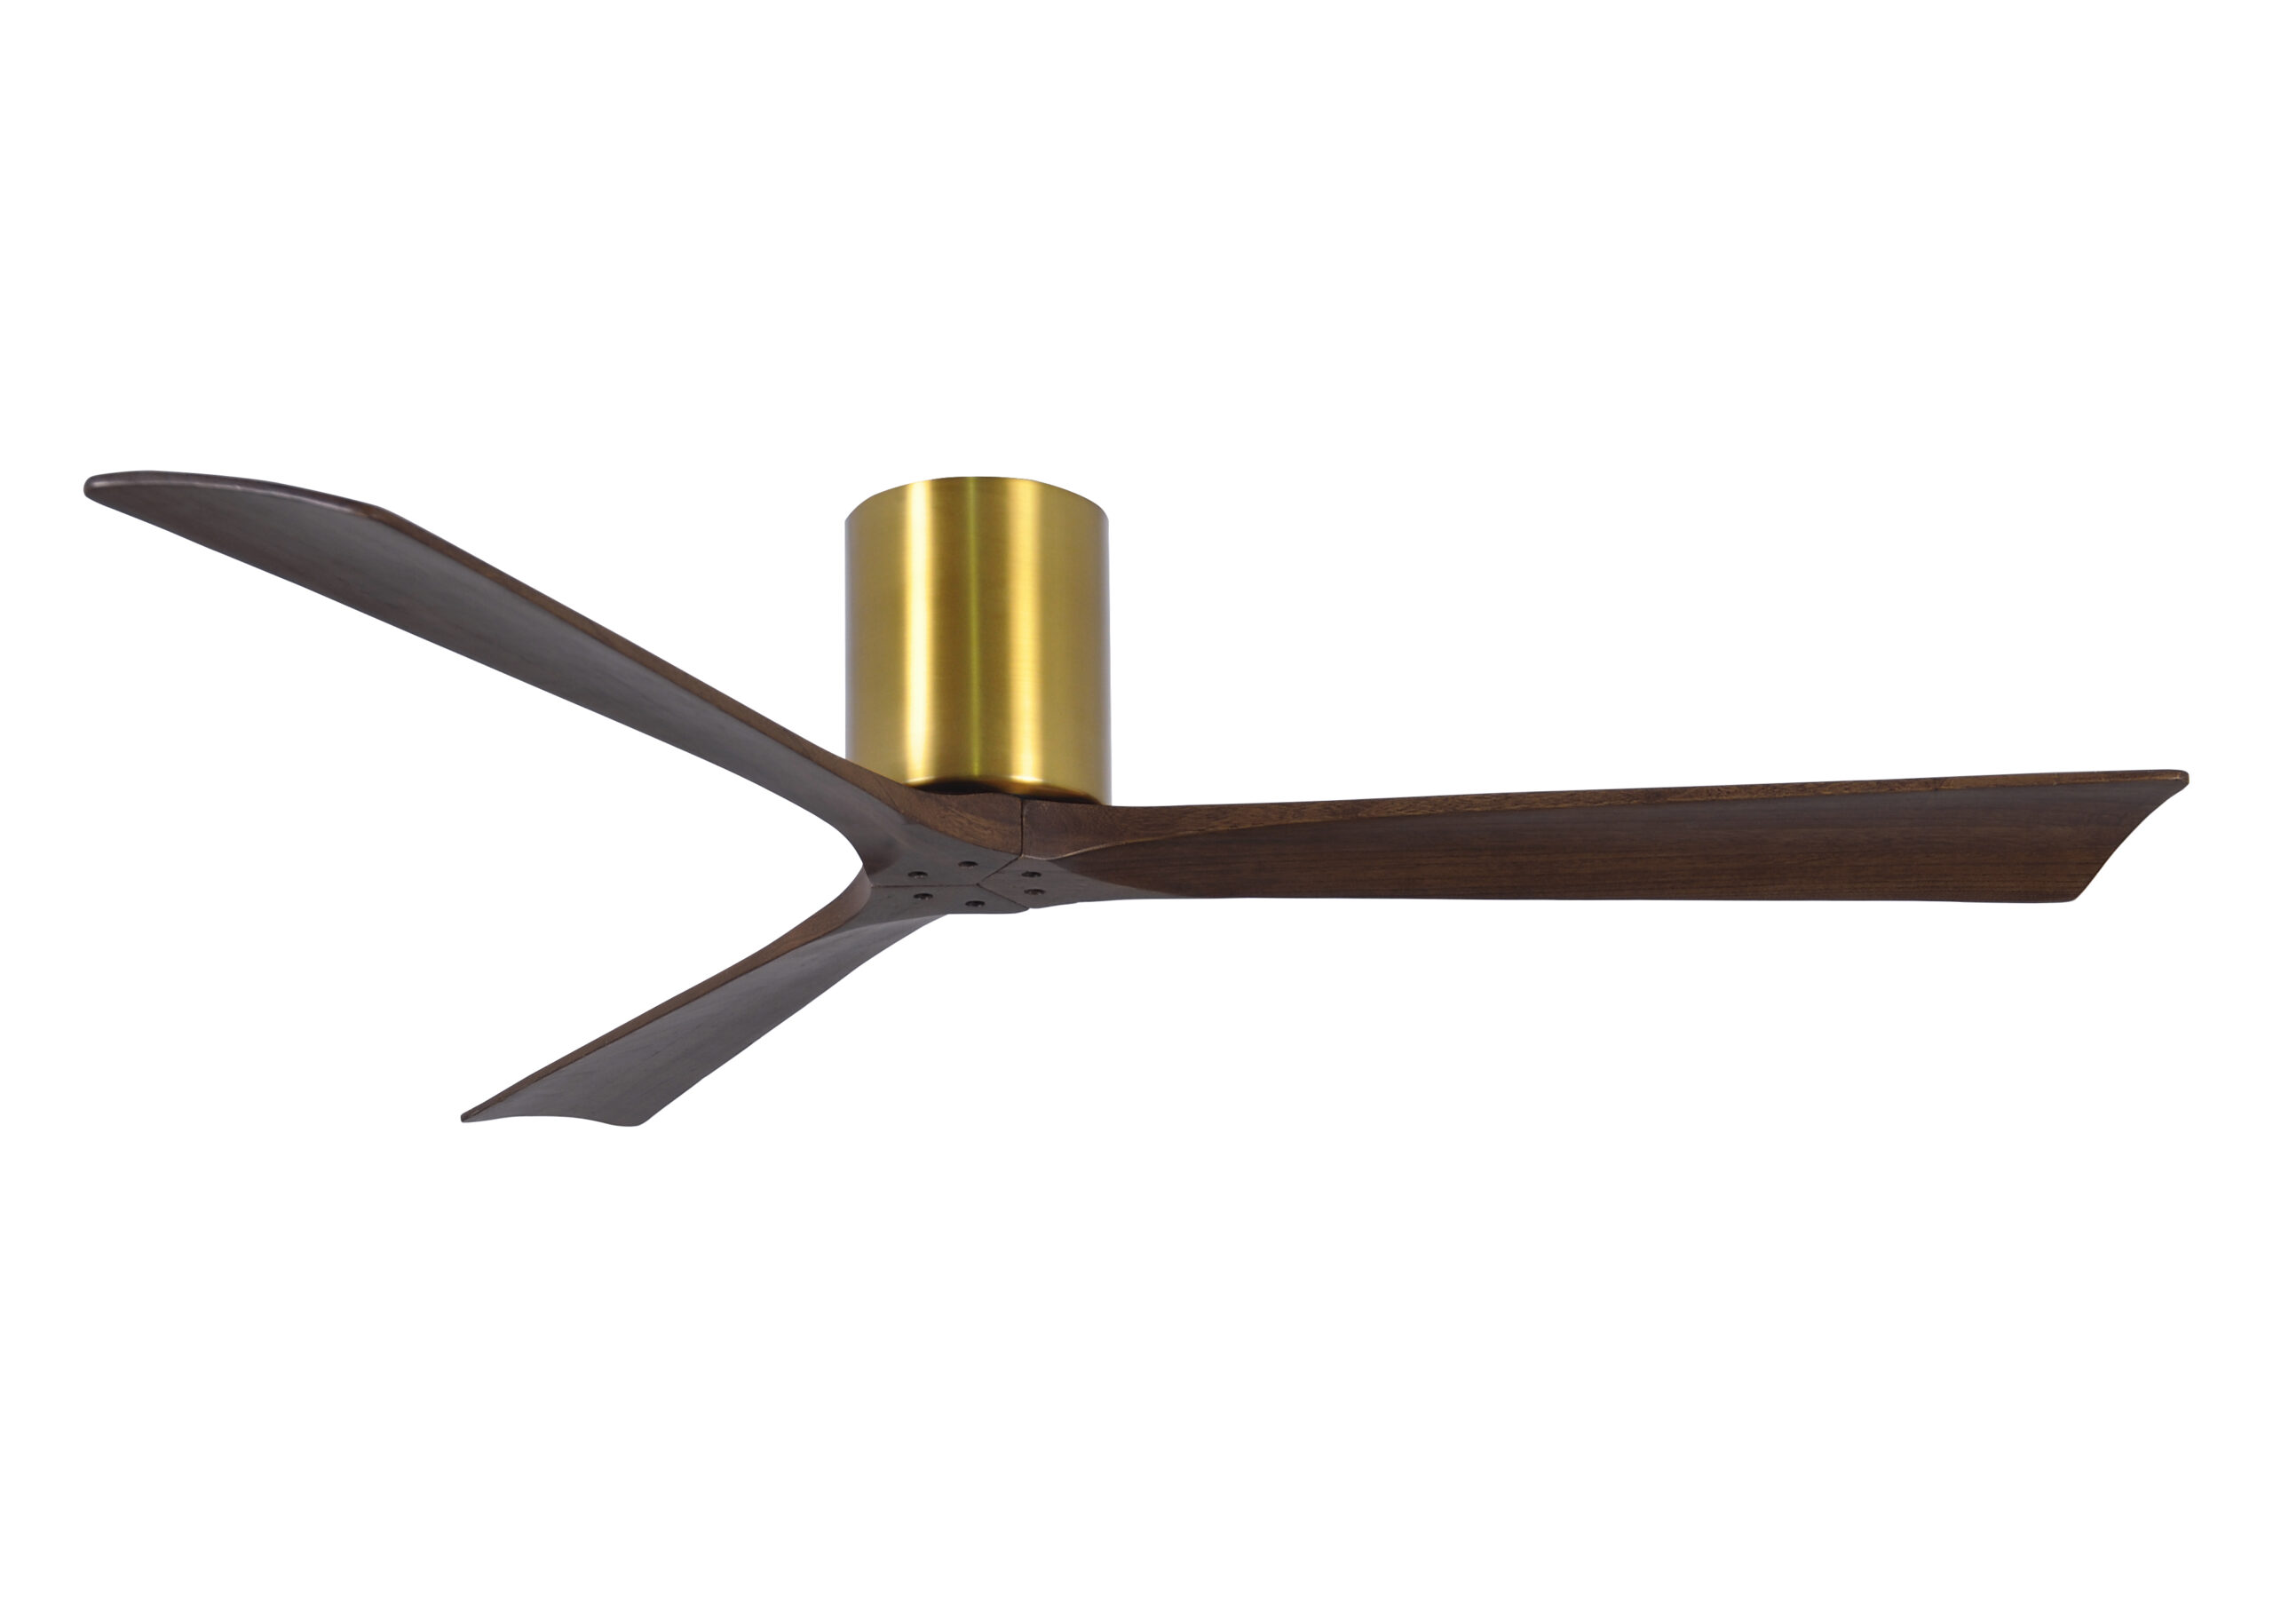 Irene-3H ceiling fan in Brushed Brass finish with 60